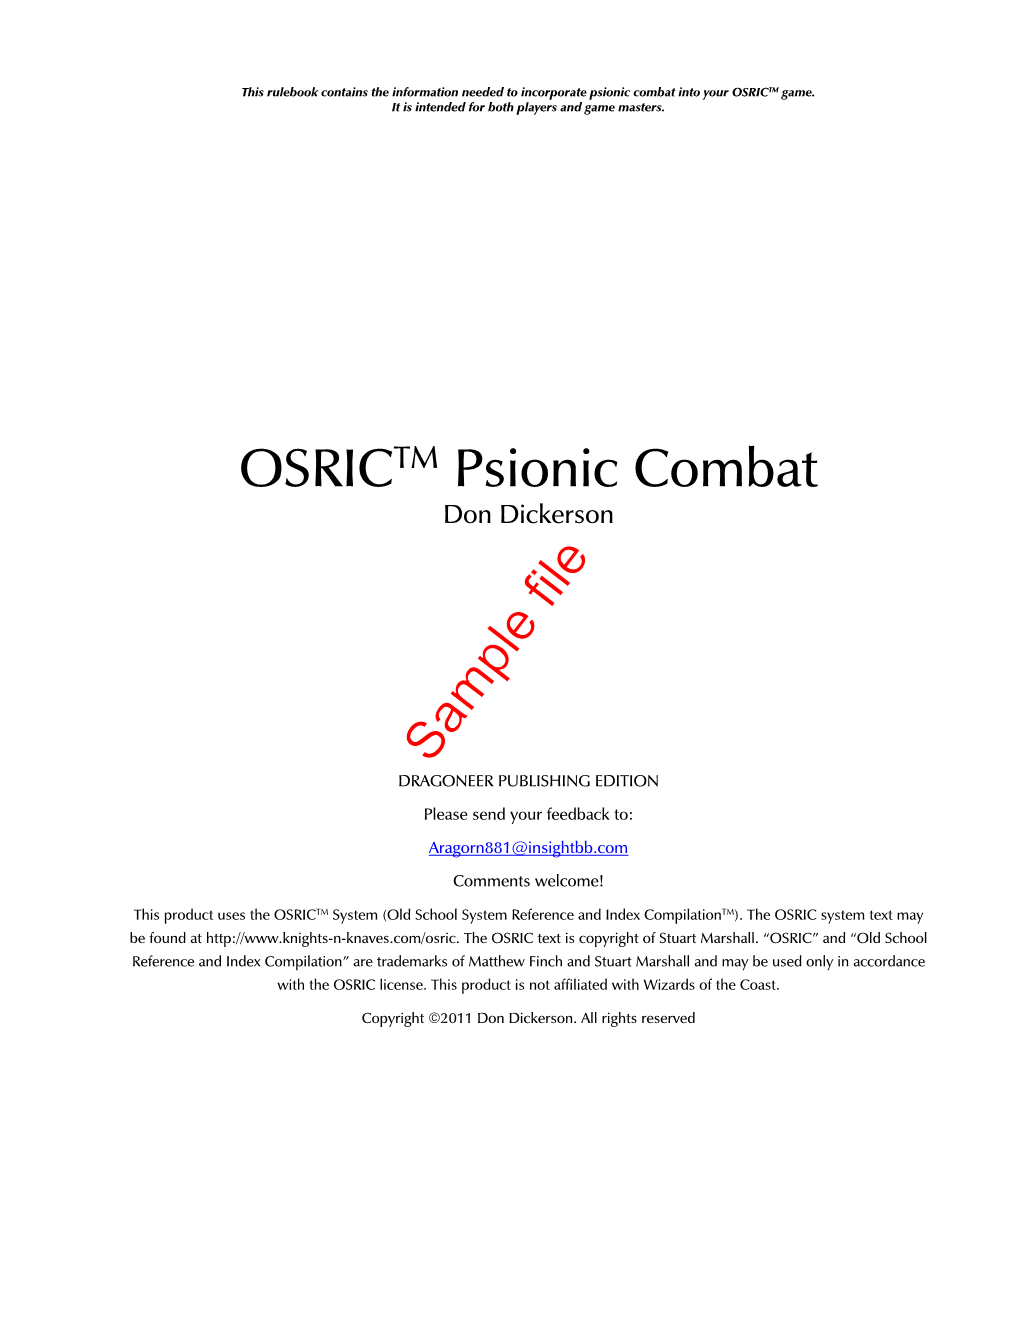 OSRIC PSIONIC COMBAT Was Initiated in 2011 at the Request of My Eldest Daughter